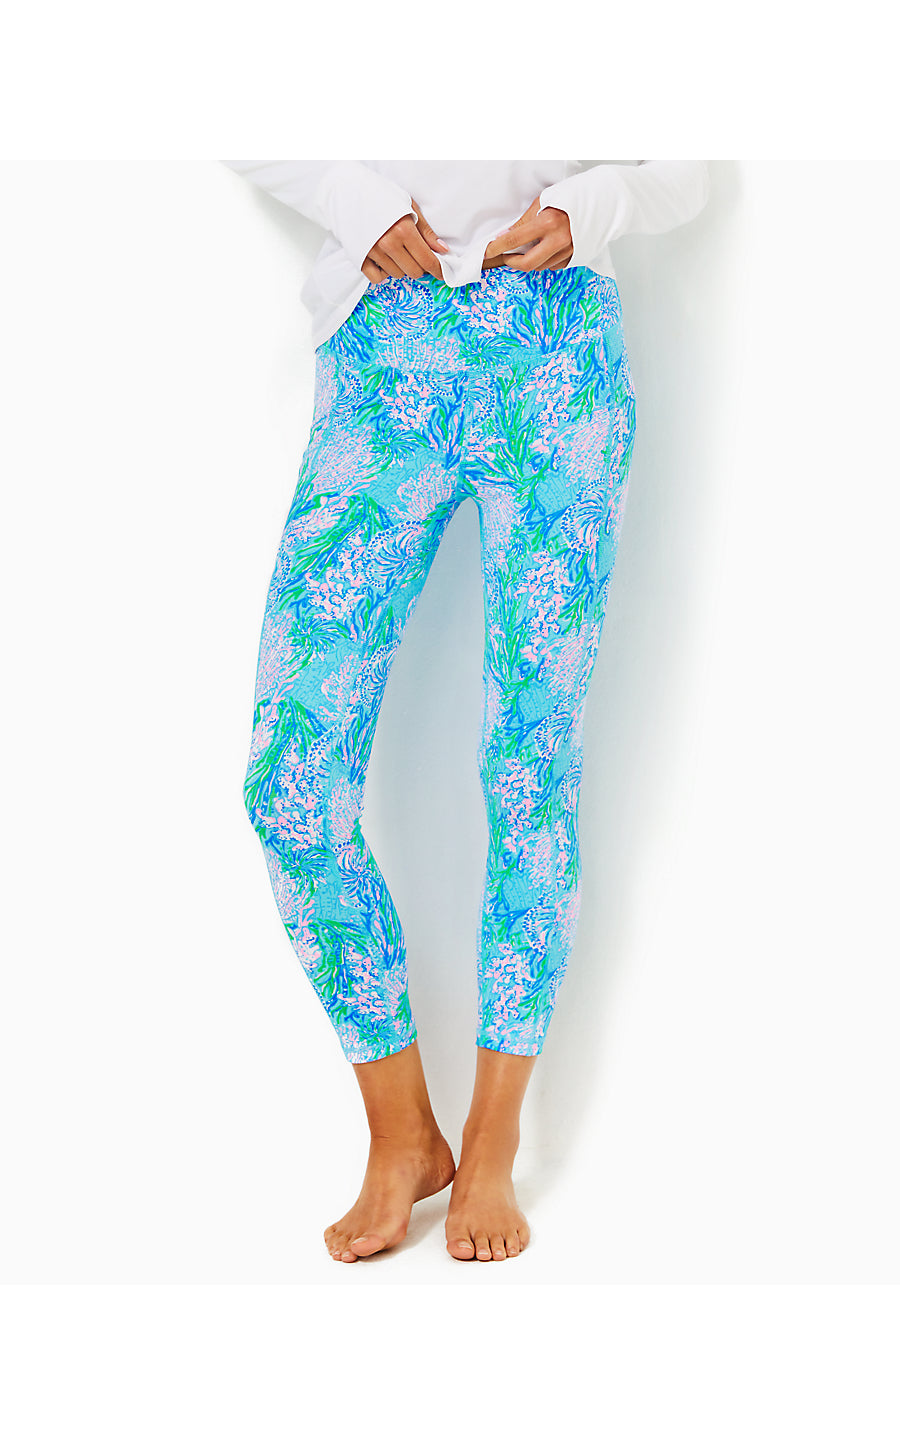 WEEKENDER HIGH RISE LEGGING - STRONG CURRENT SEA